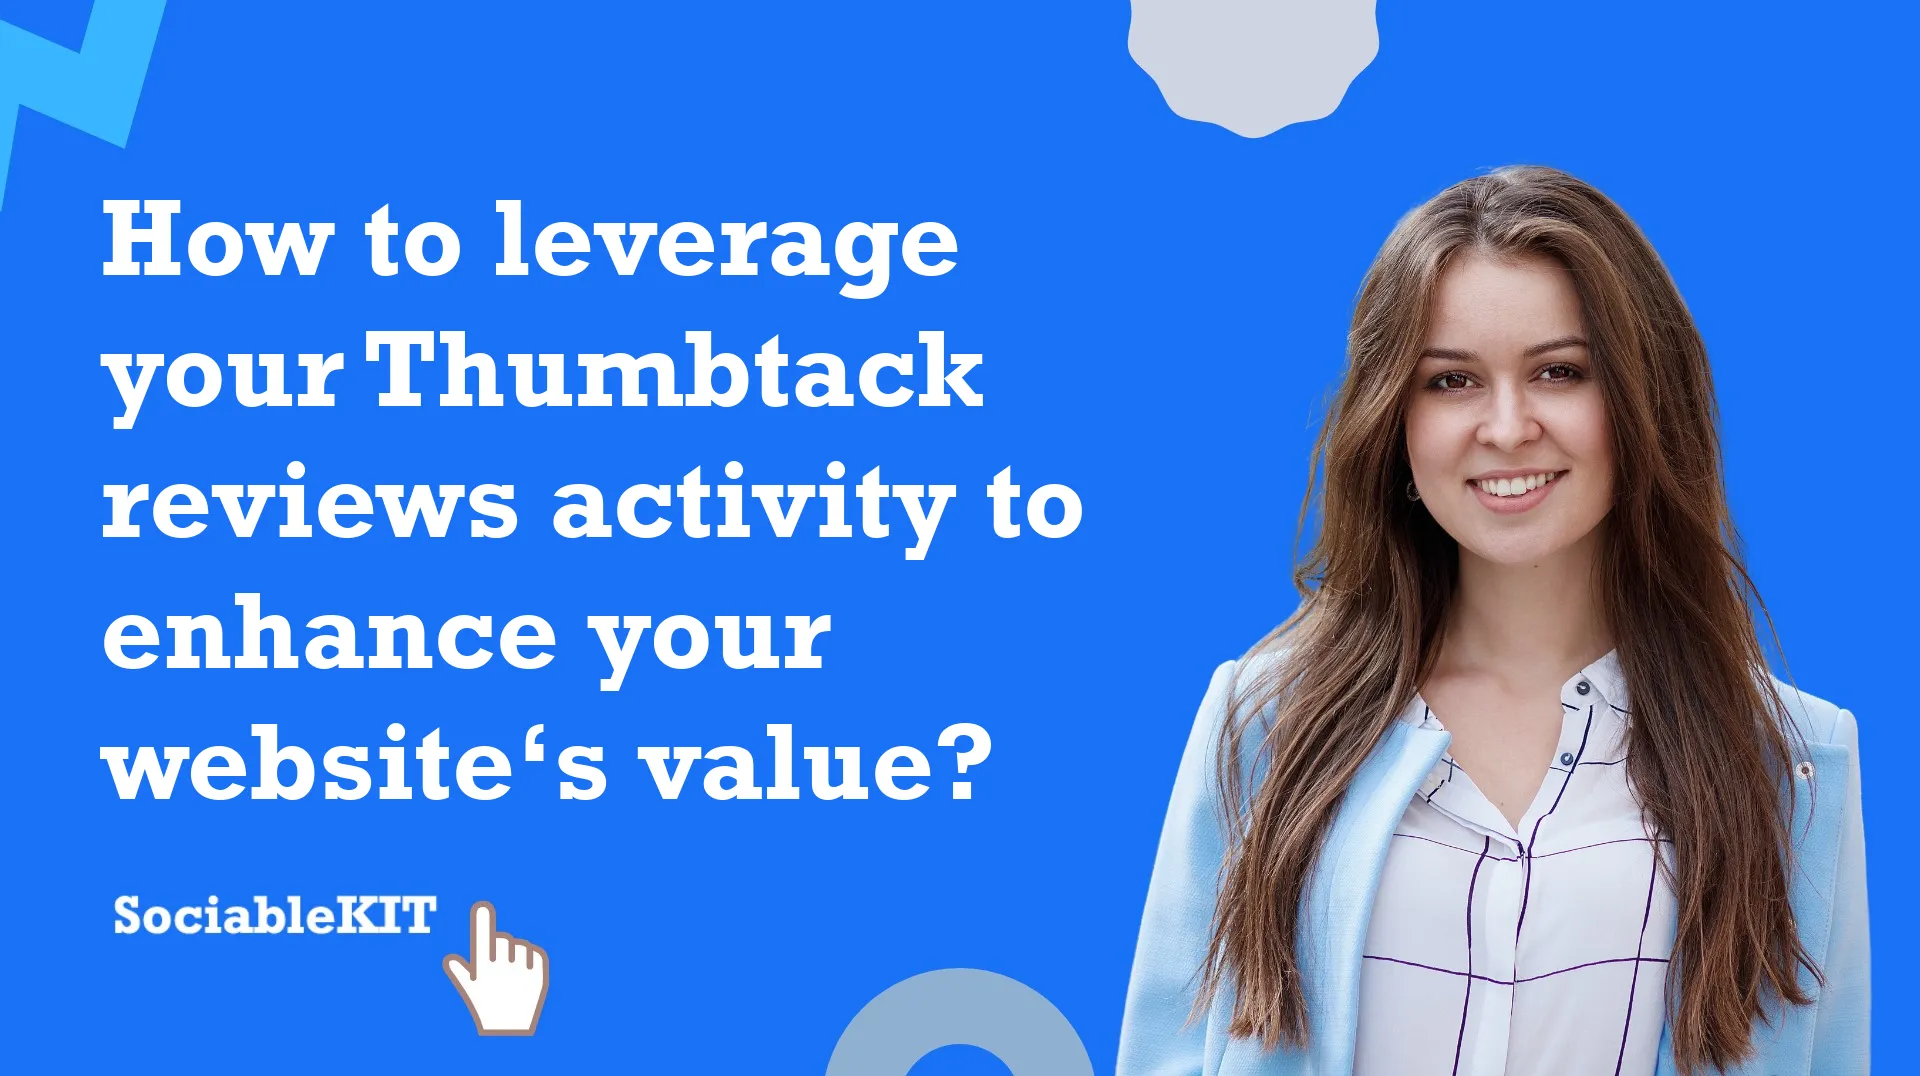 How to leverage your Thumbtack reviews activity to enhance your website’s value?